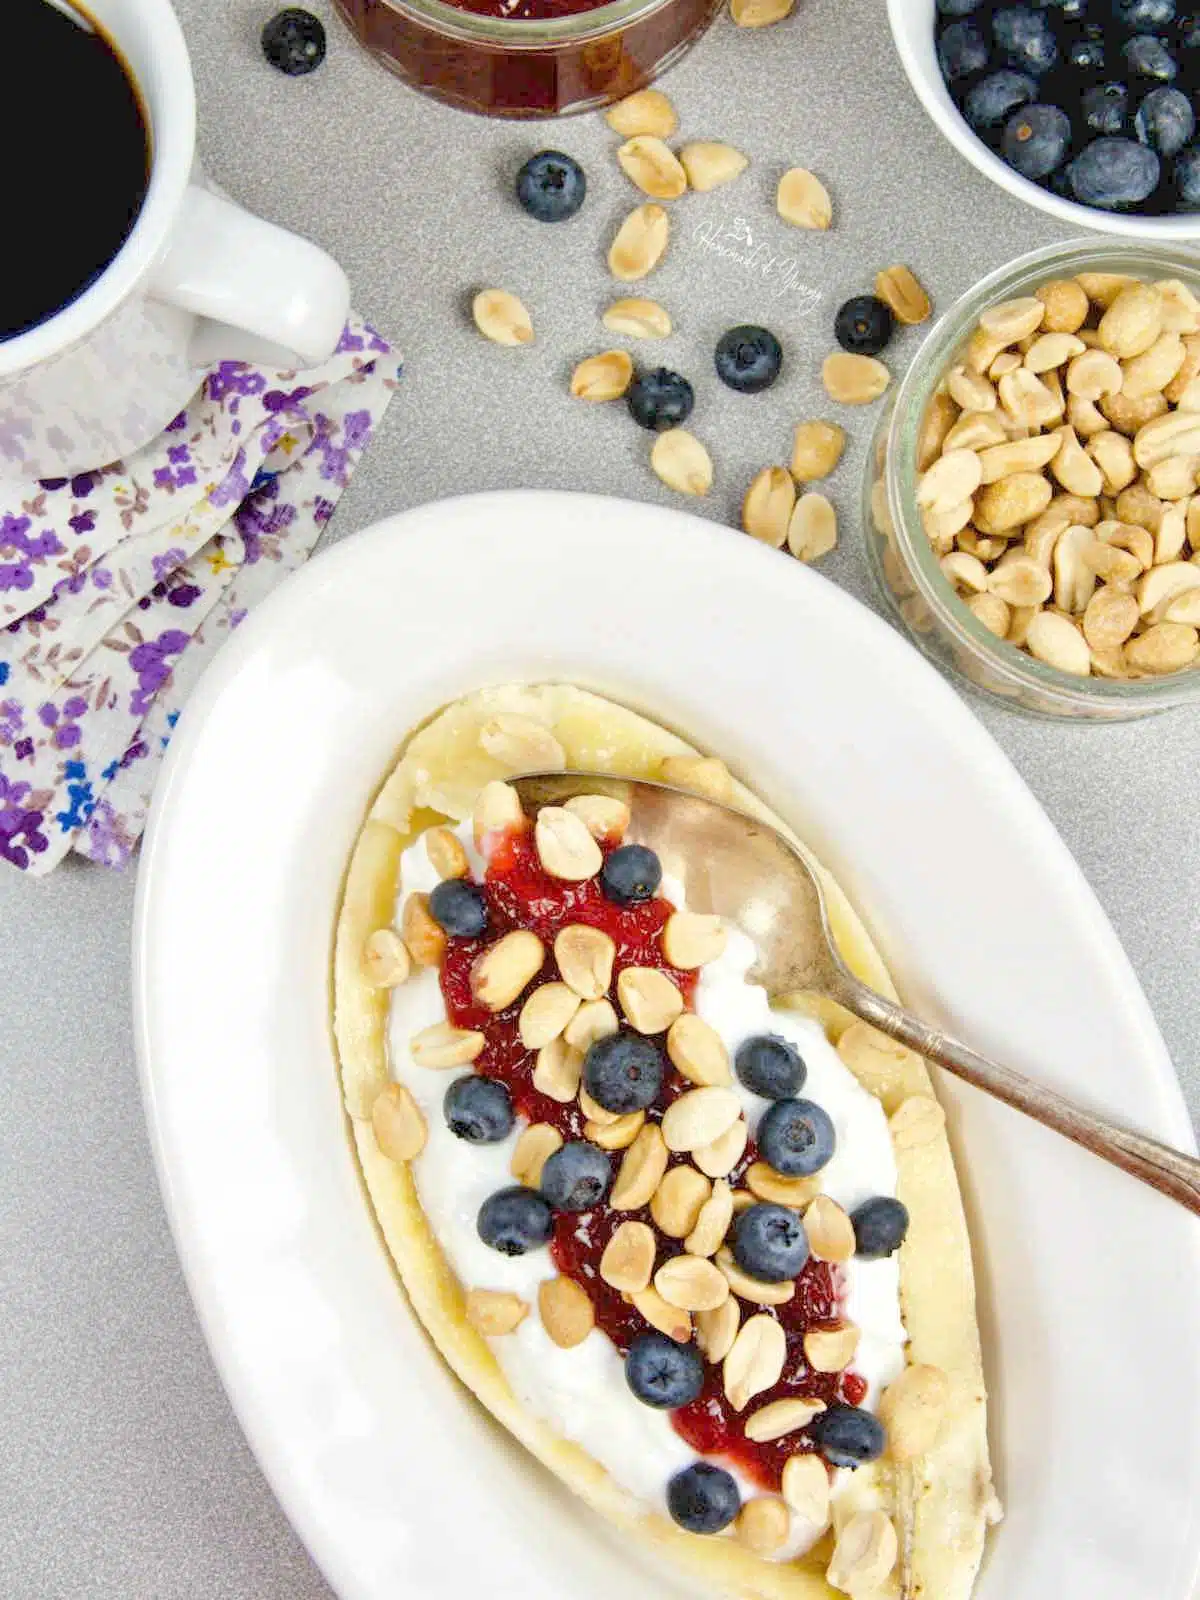 Banana Split Breakfast recipe for a fun way to start your day.